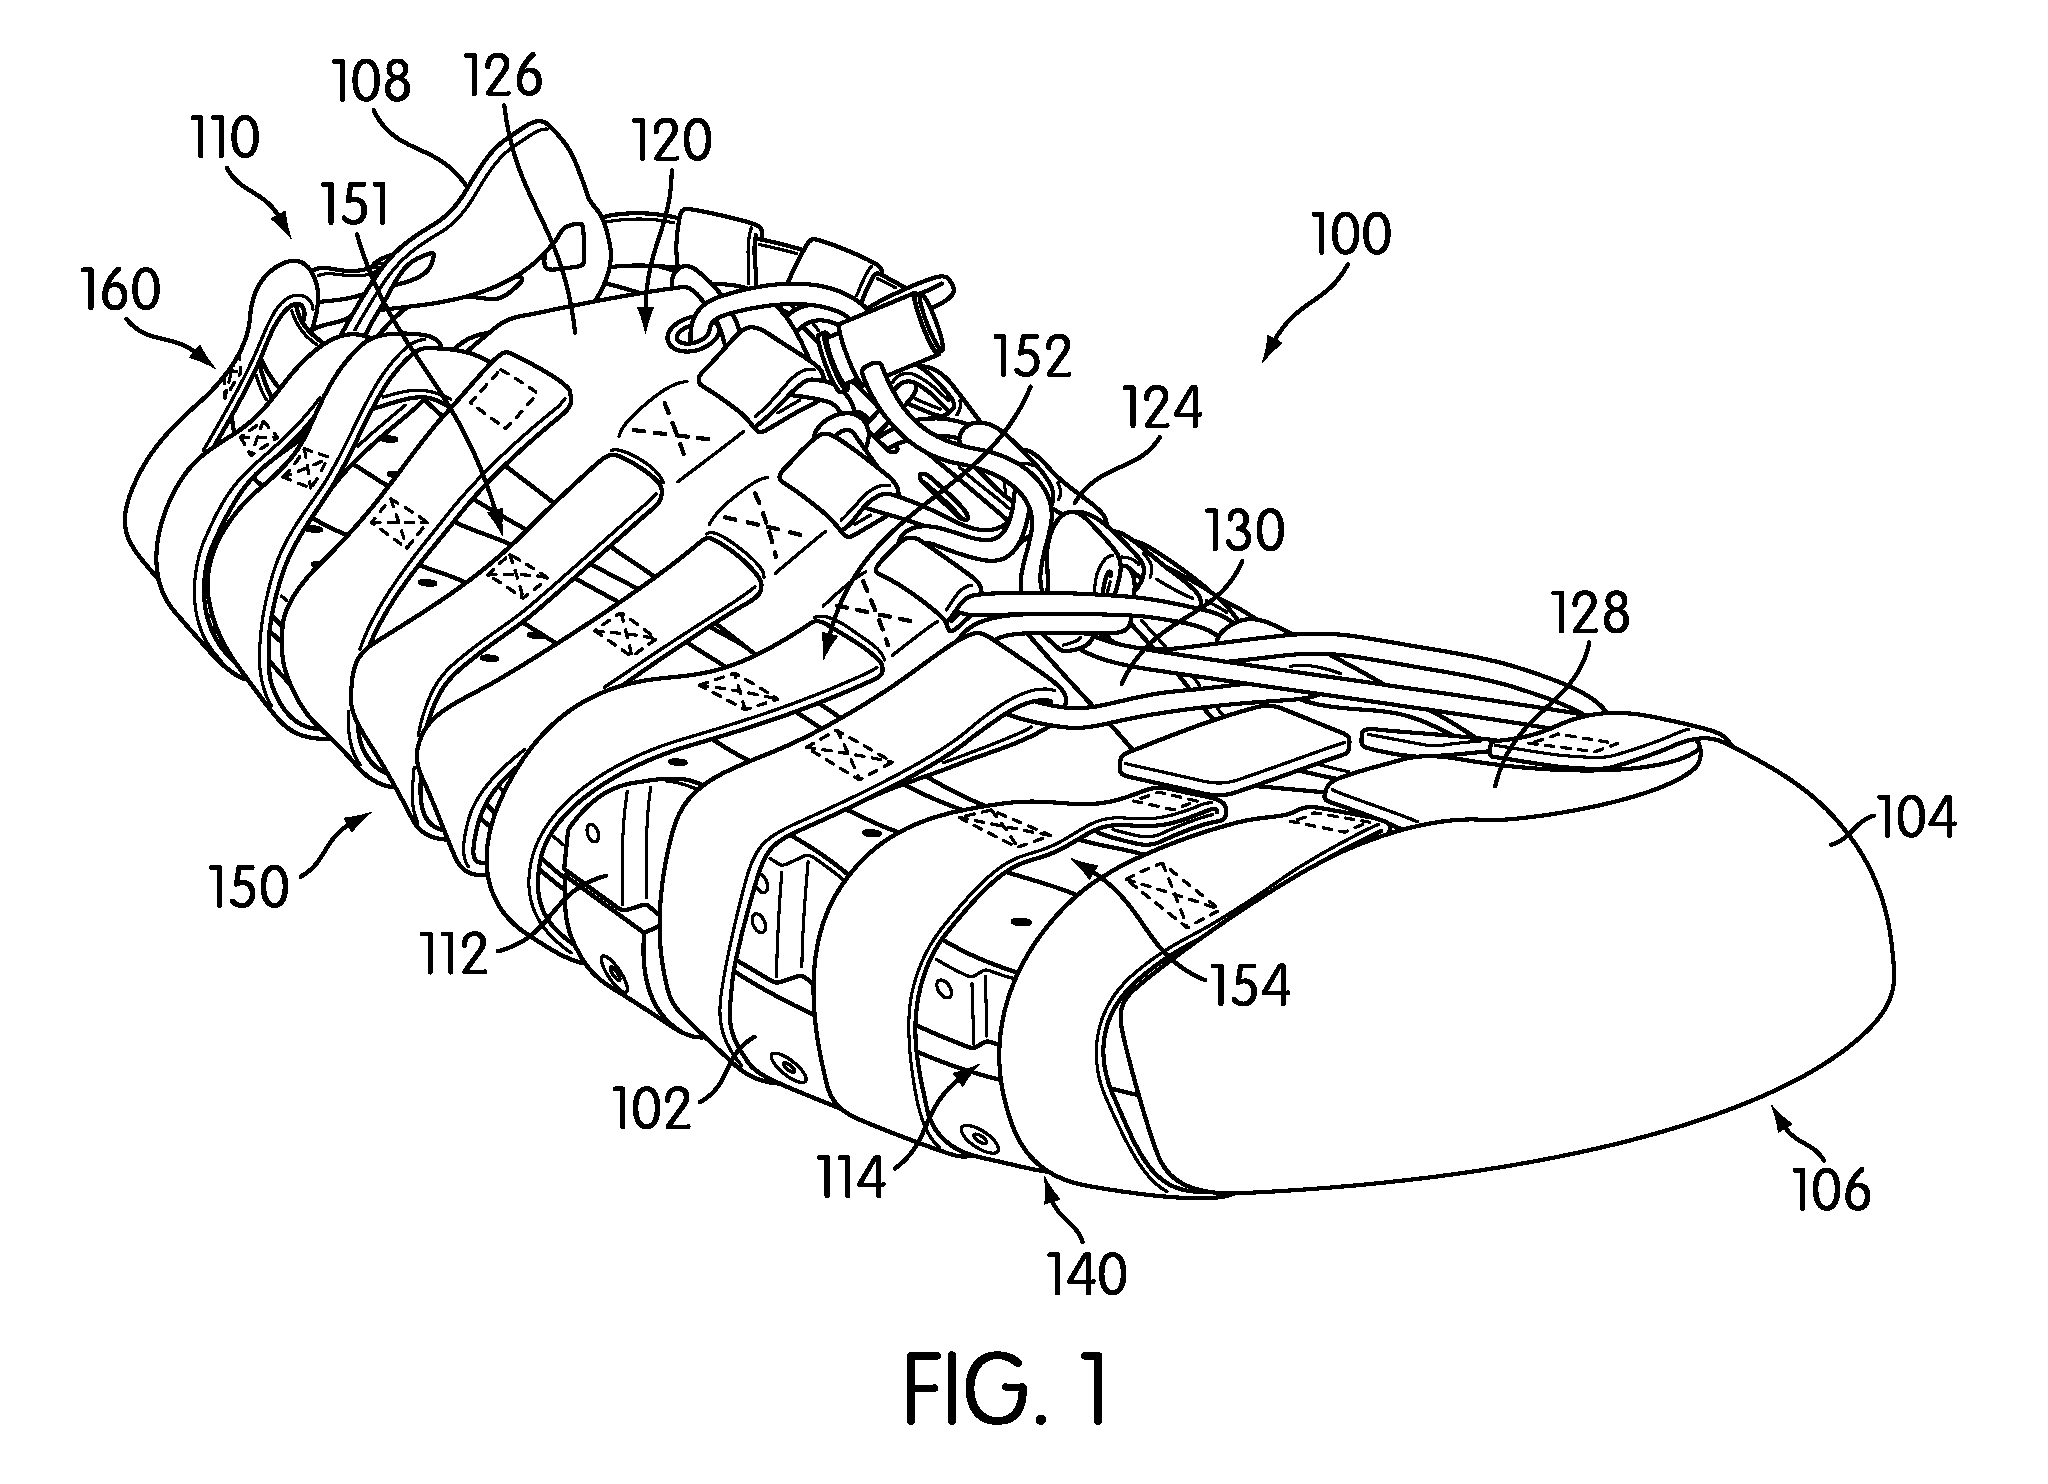 Article of Footwear Including a Woven Strap System